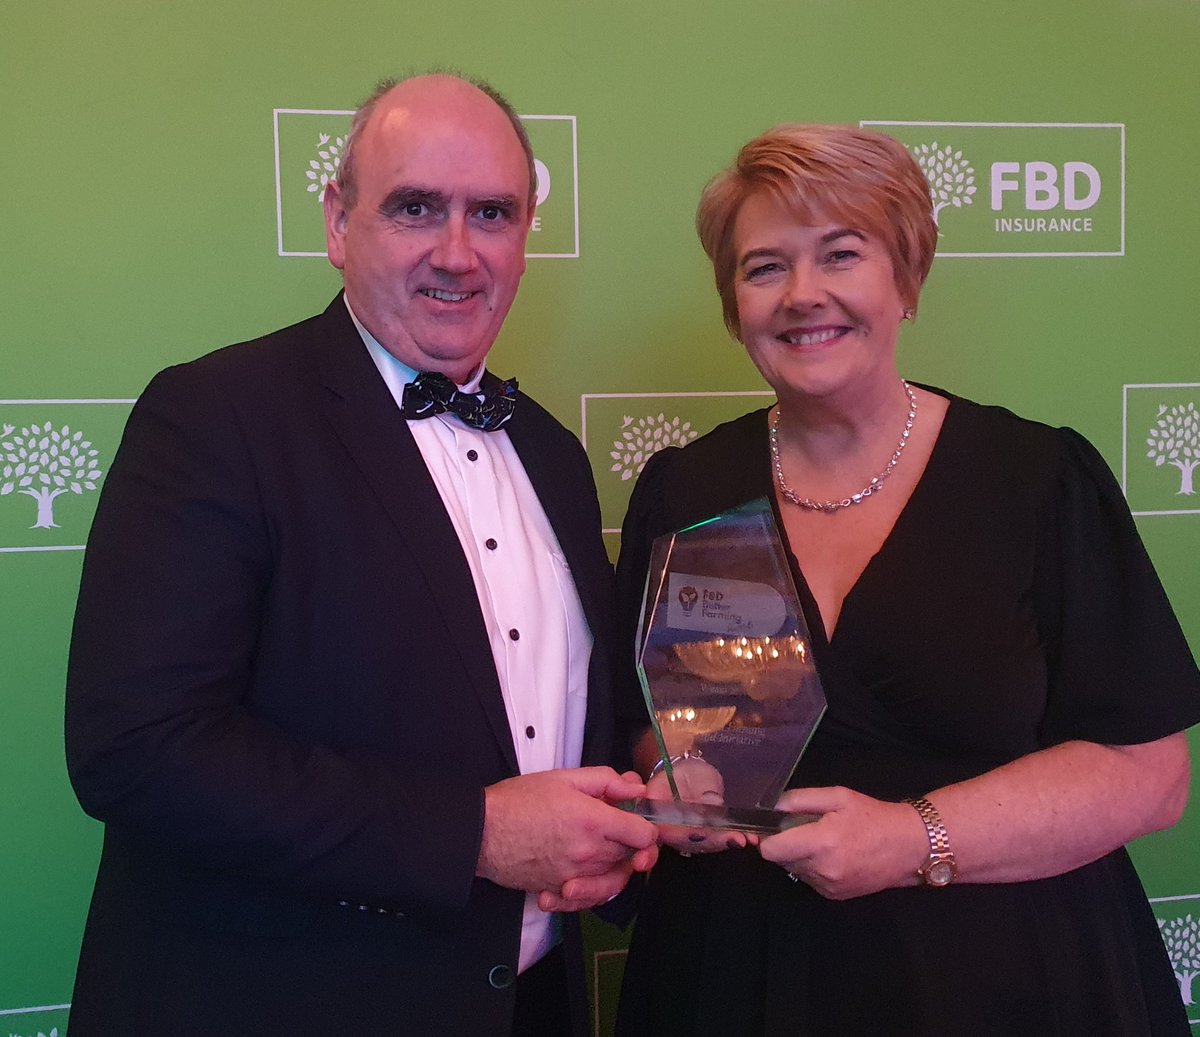 Delighted to accept this #BetterFarming  award @Better_Farming @fbd_ie on behalf of all the great staff, people, farmers and stakeholders including @agriculture_ie who make #Socialfarming so unique, special and innovative @McConalogue @martinhaydon1 @pippa_hackett @leitrimdevco